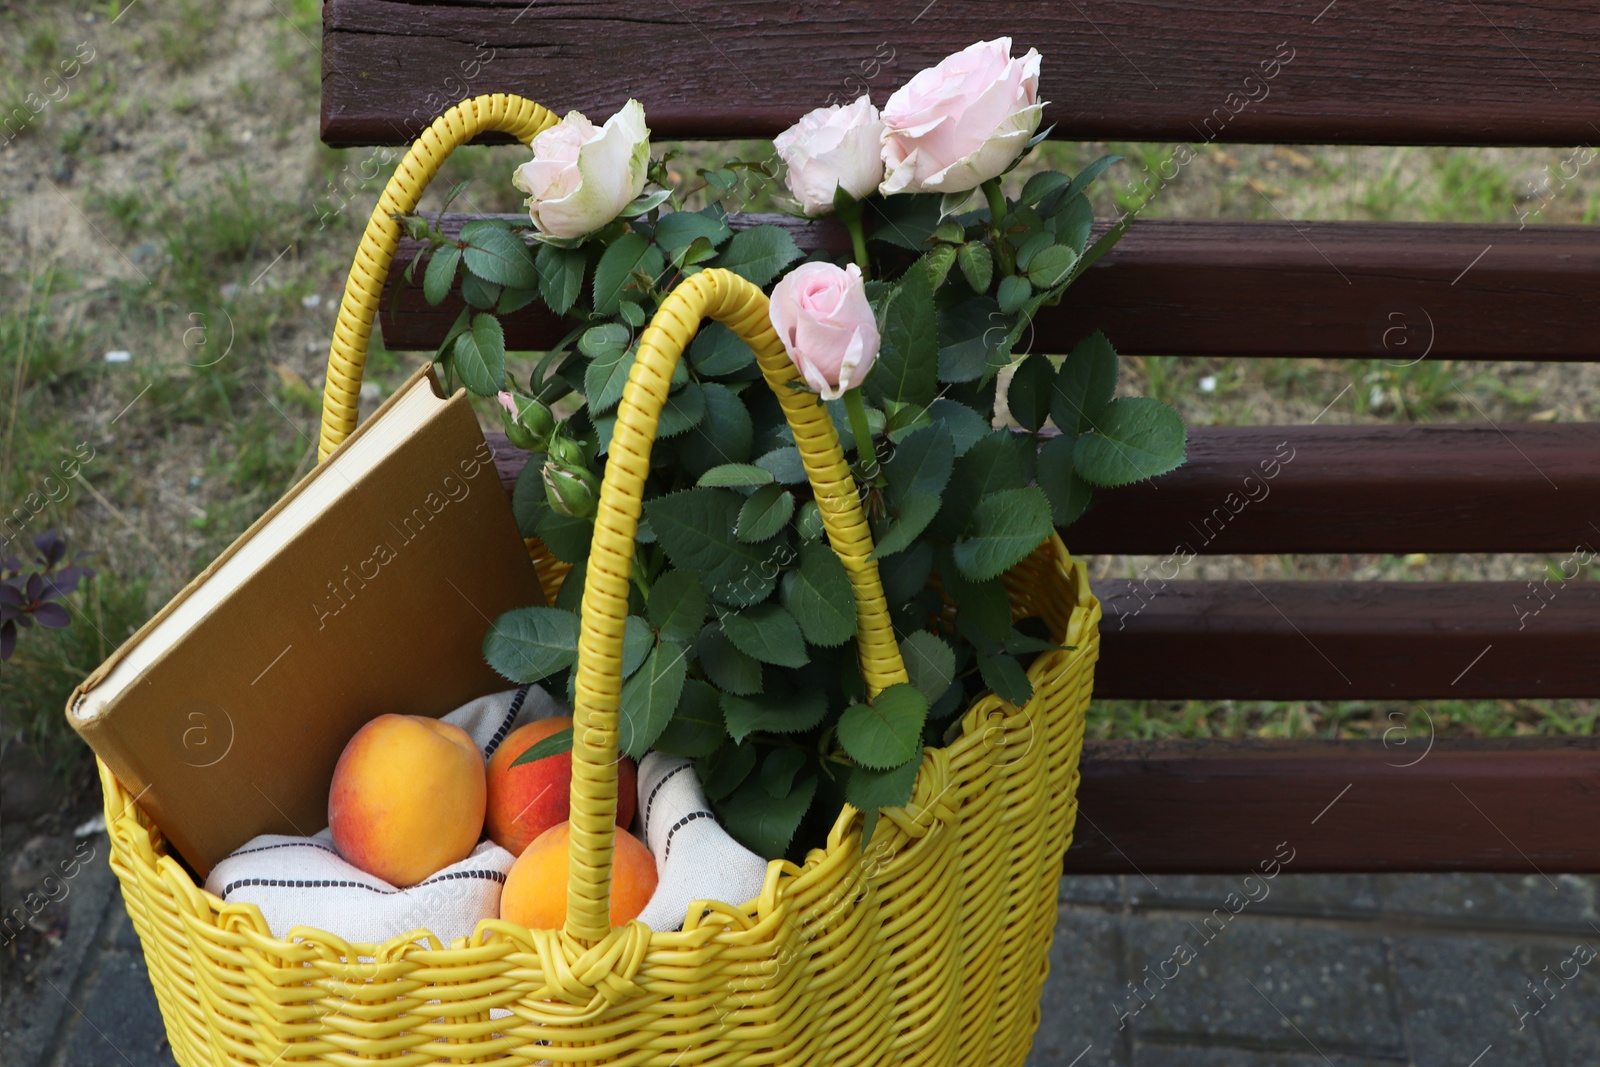 Photo of Yellow wicker bag with roses, book and peaches on bench outdoors